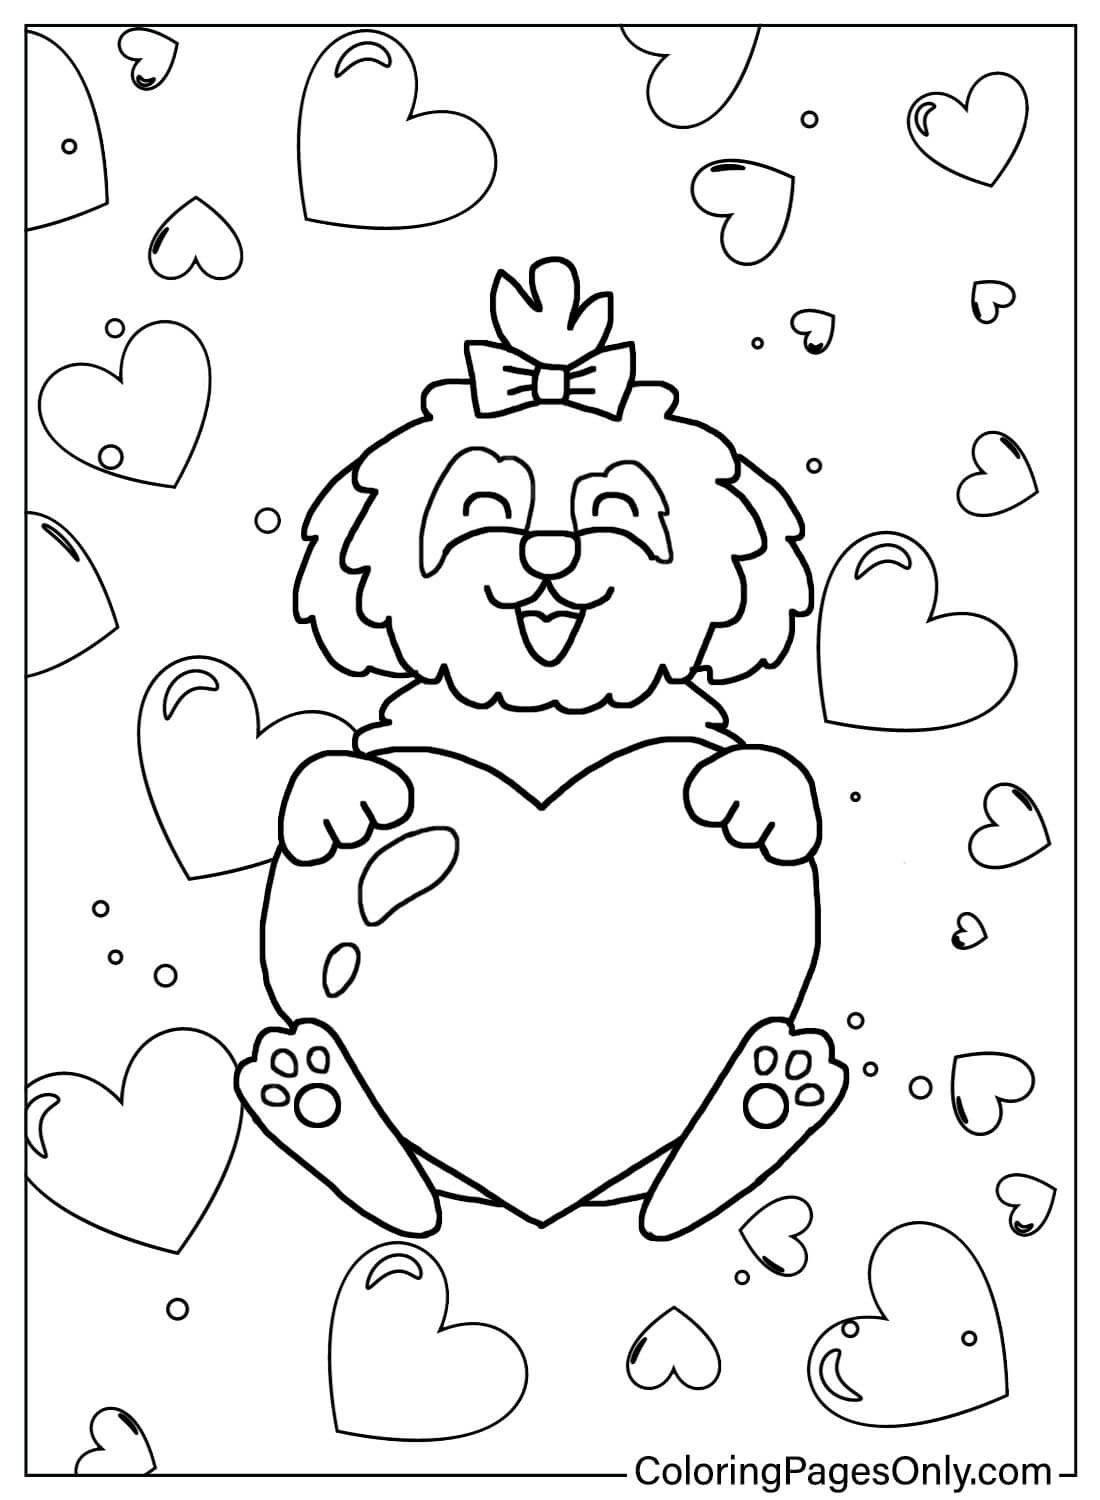 Shih Tzu Coloring Page Printable from Shih Tzu